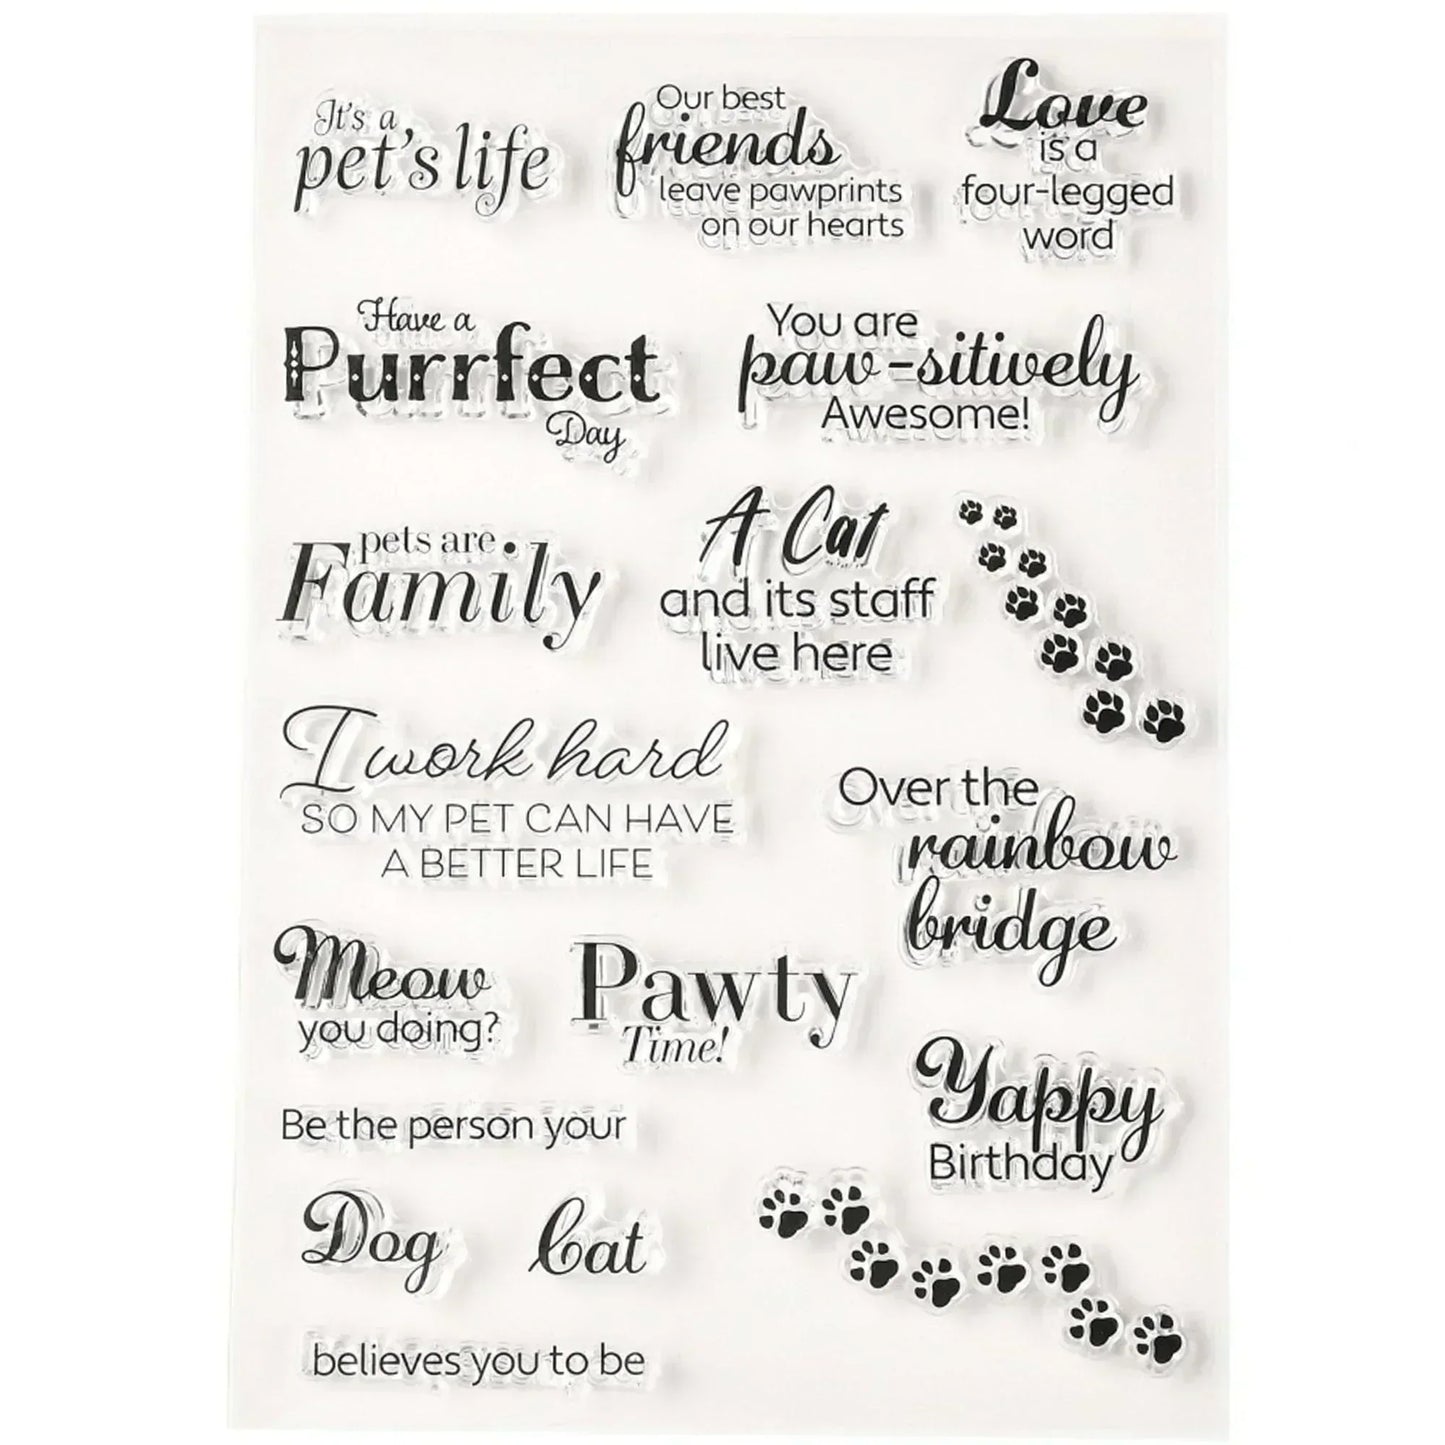 Paw Prints Pet Life Message Clear Stamp Silicone Rubber Scrapbooking Card Making